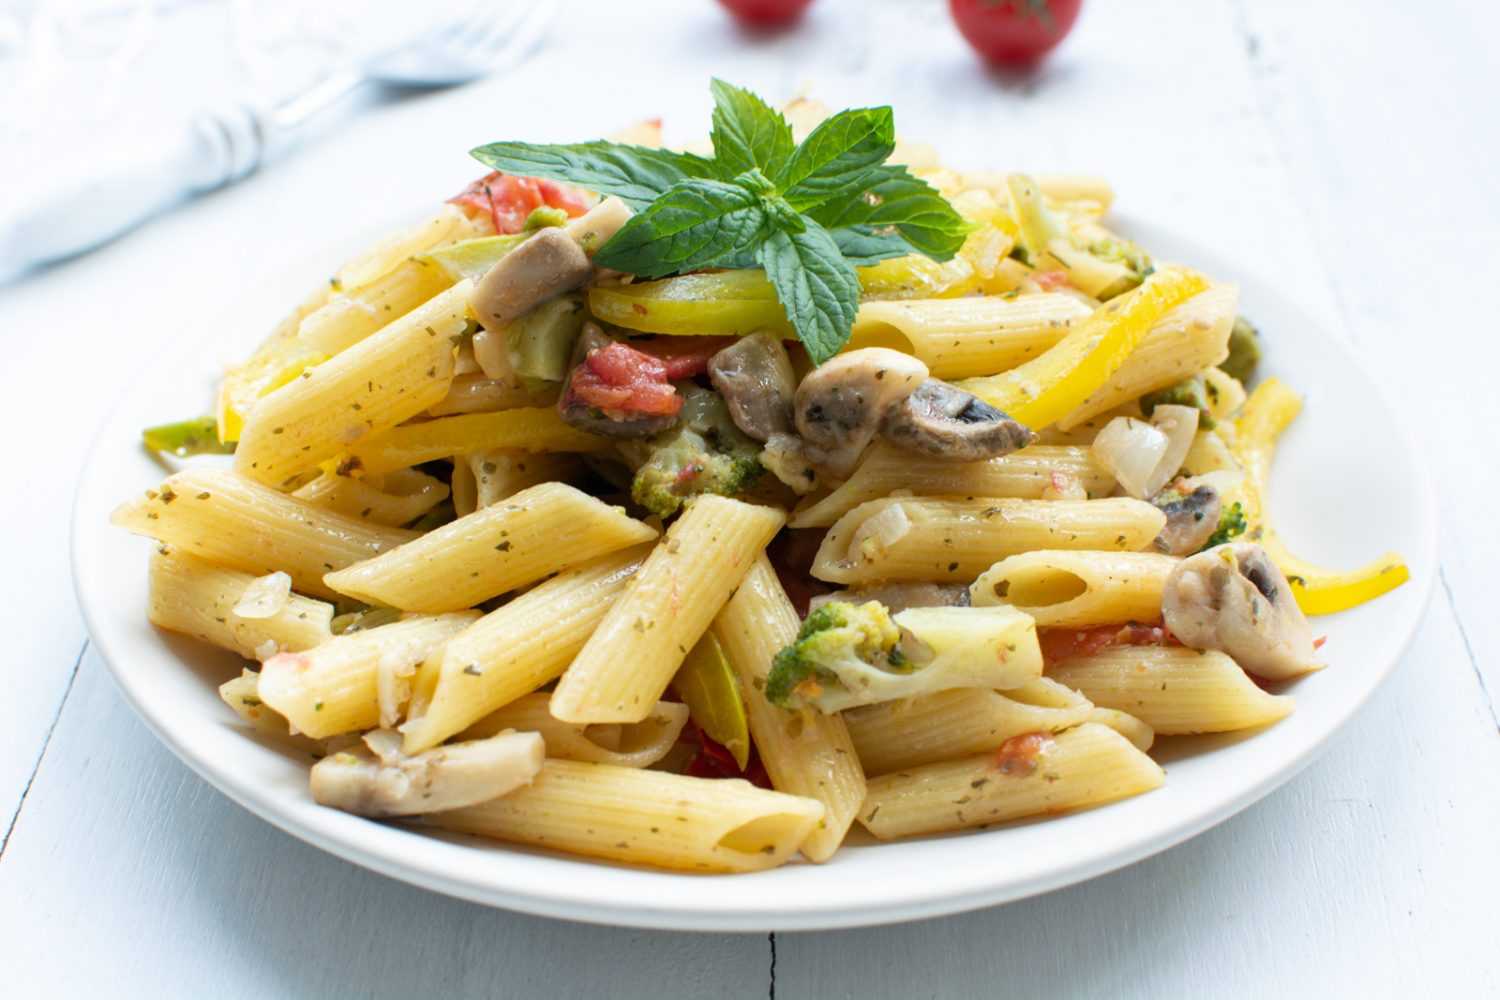 Penna pasta with tomatoes, mushrooms, spices and basil on top in white plate 